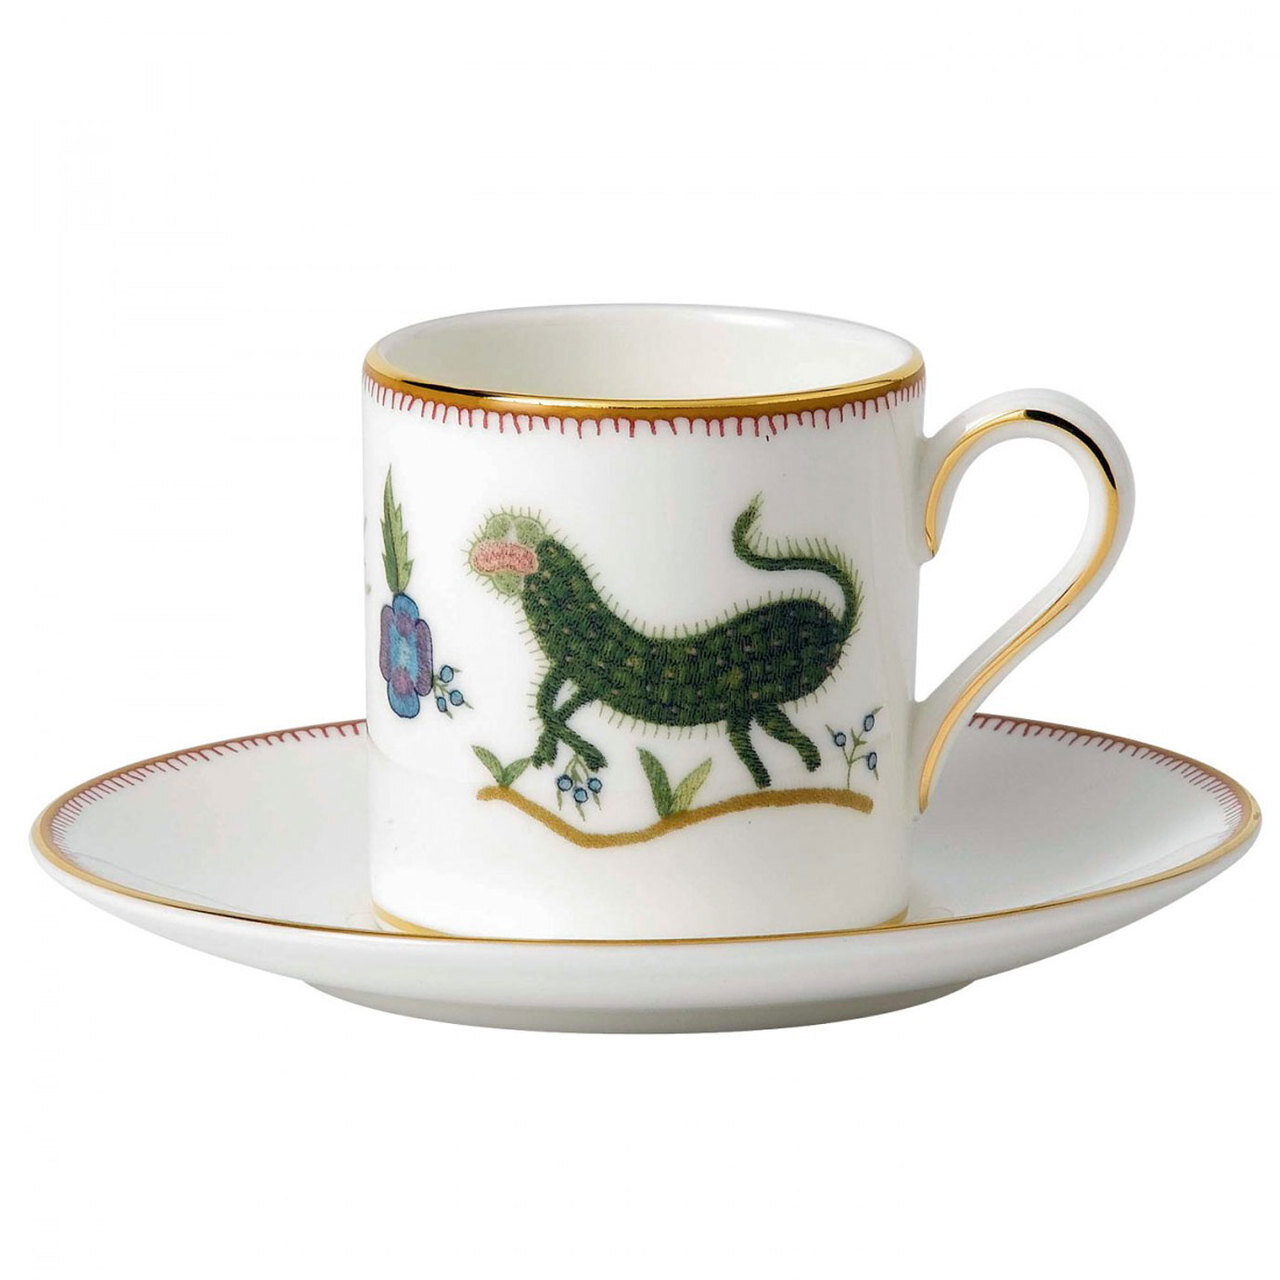 Wedgwood Mythical Creatures Mythical Creatures Espresso Cup & Saucer Set